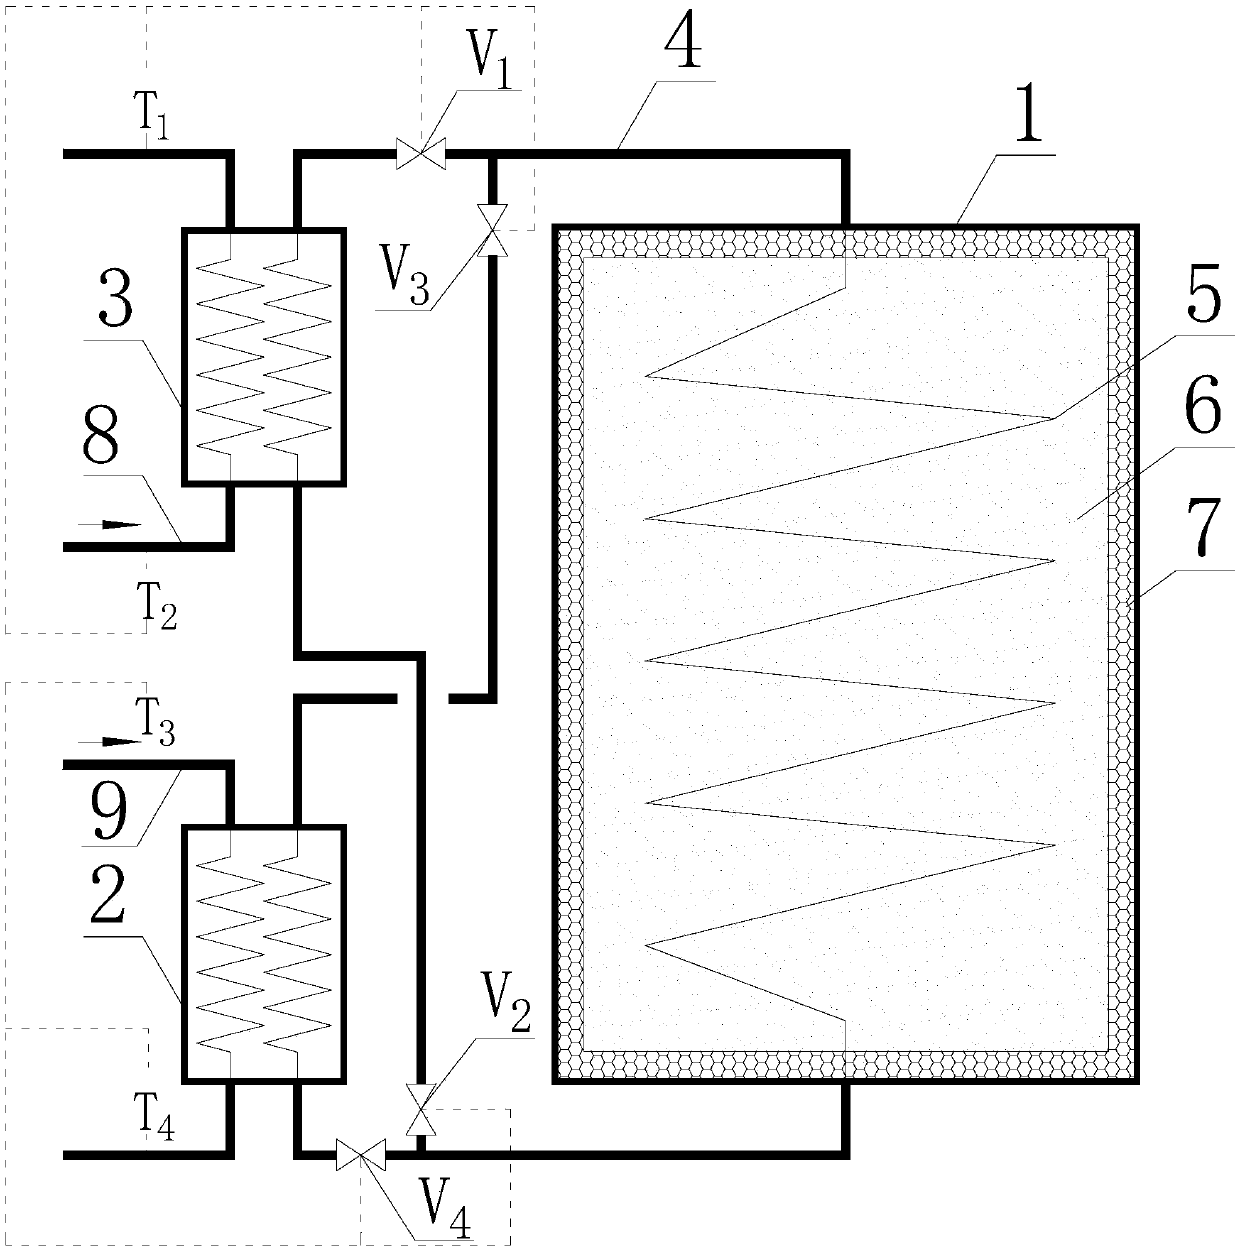 Energy storage device utilizing temperature difference self-driving loop